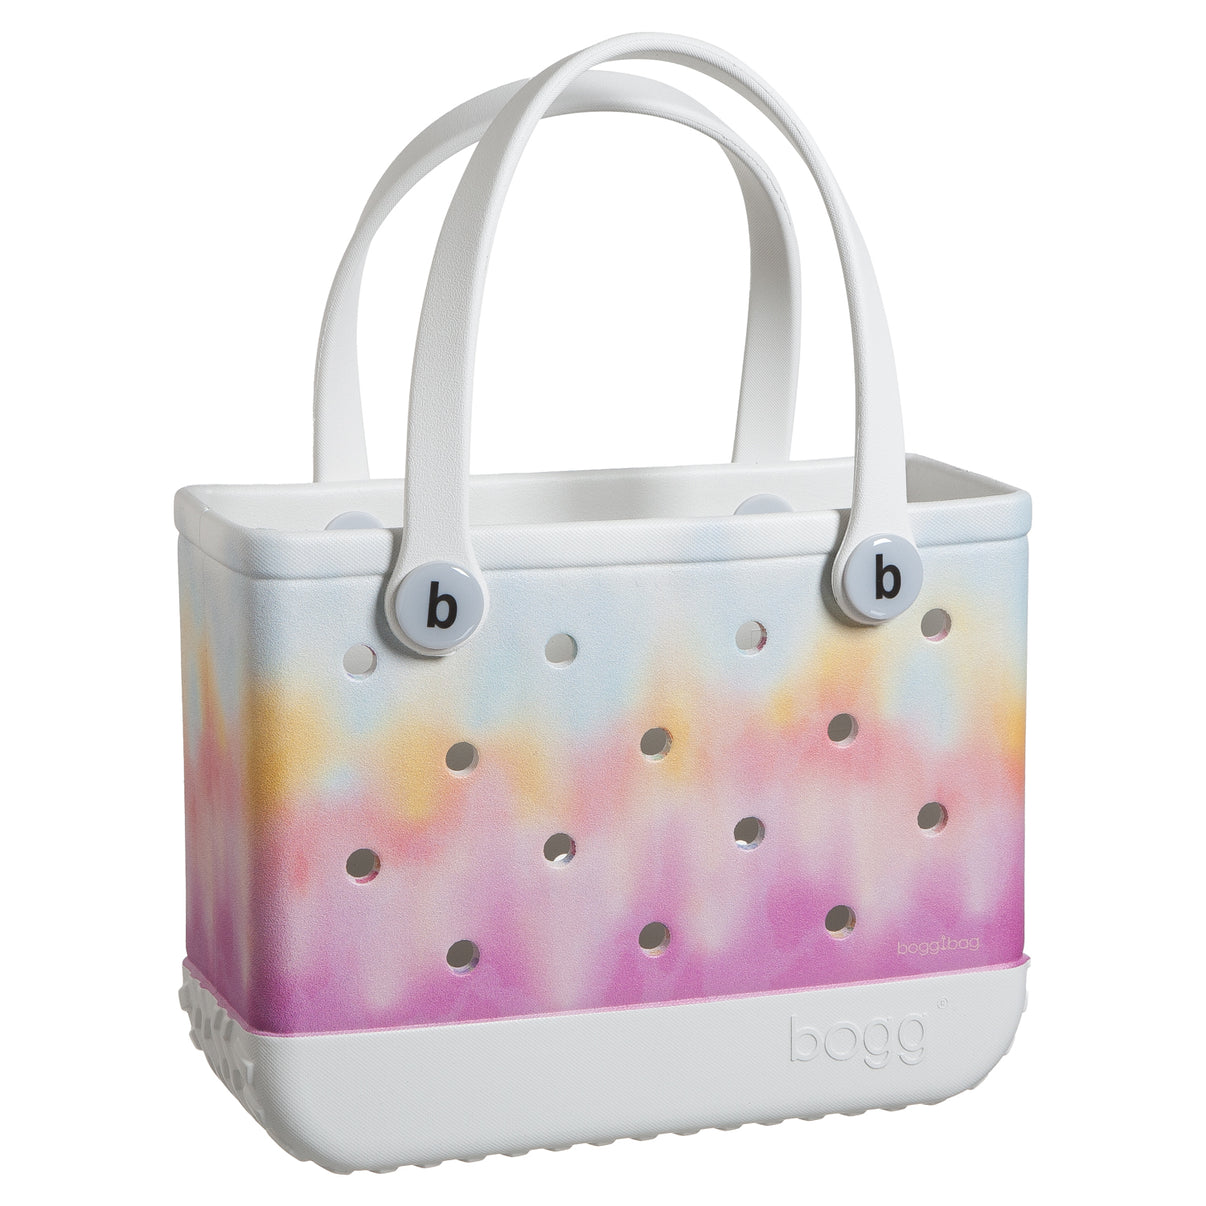 Bitty Bogg Bag - Cotton Candy